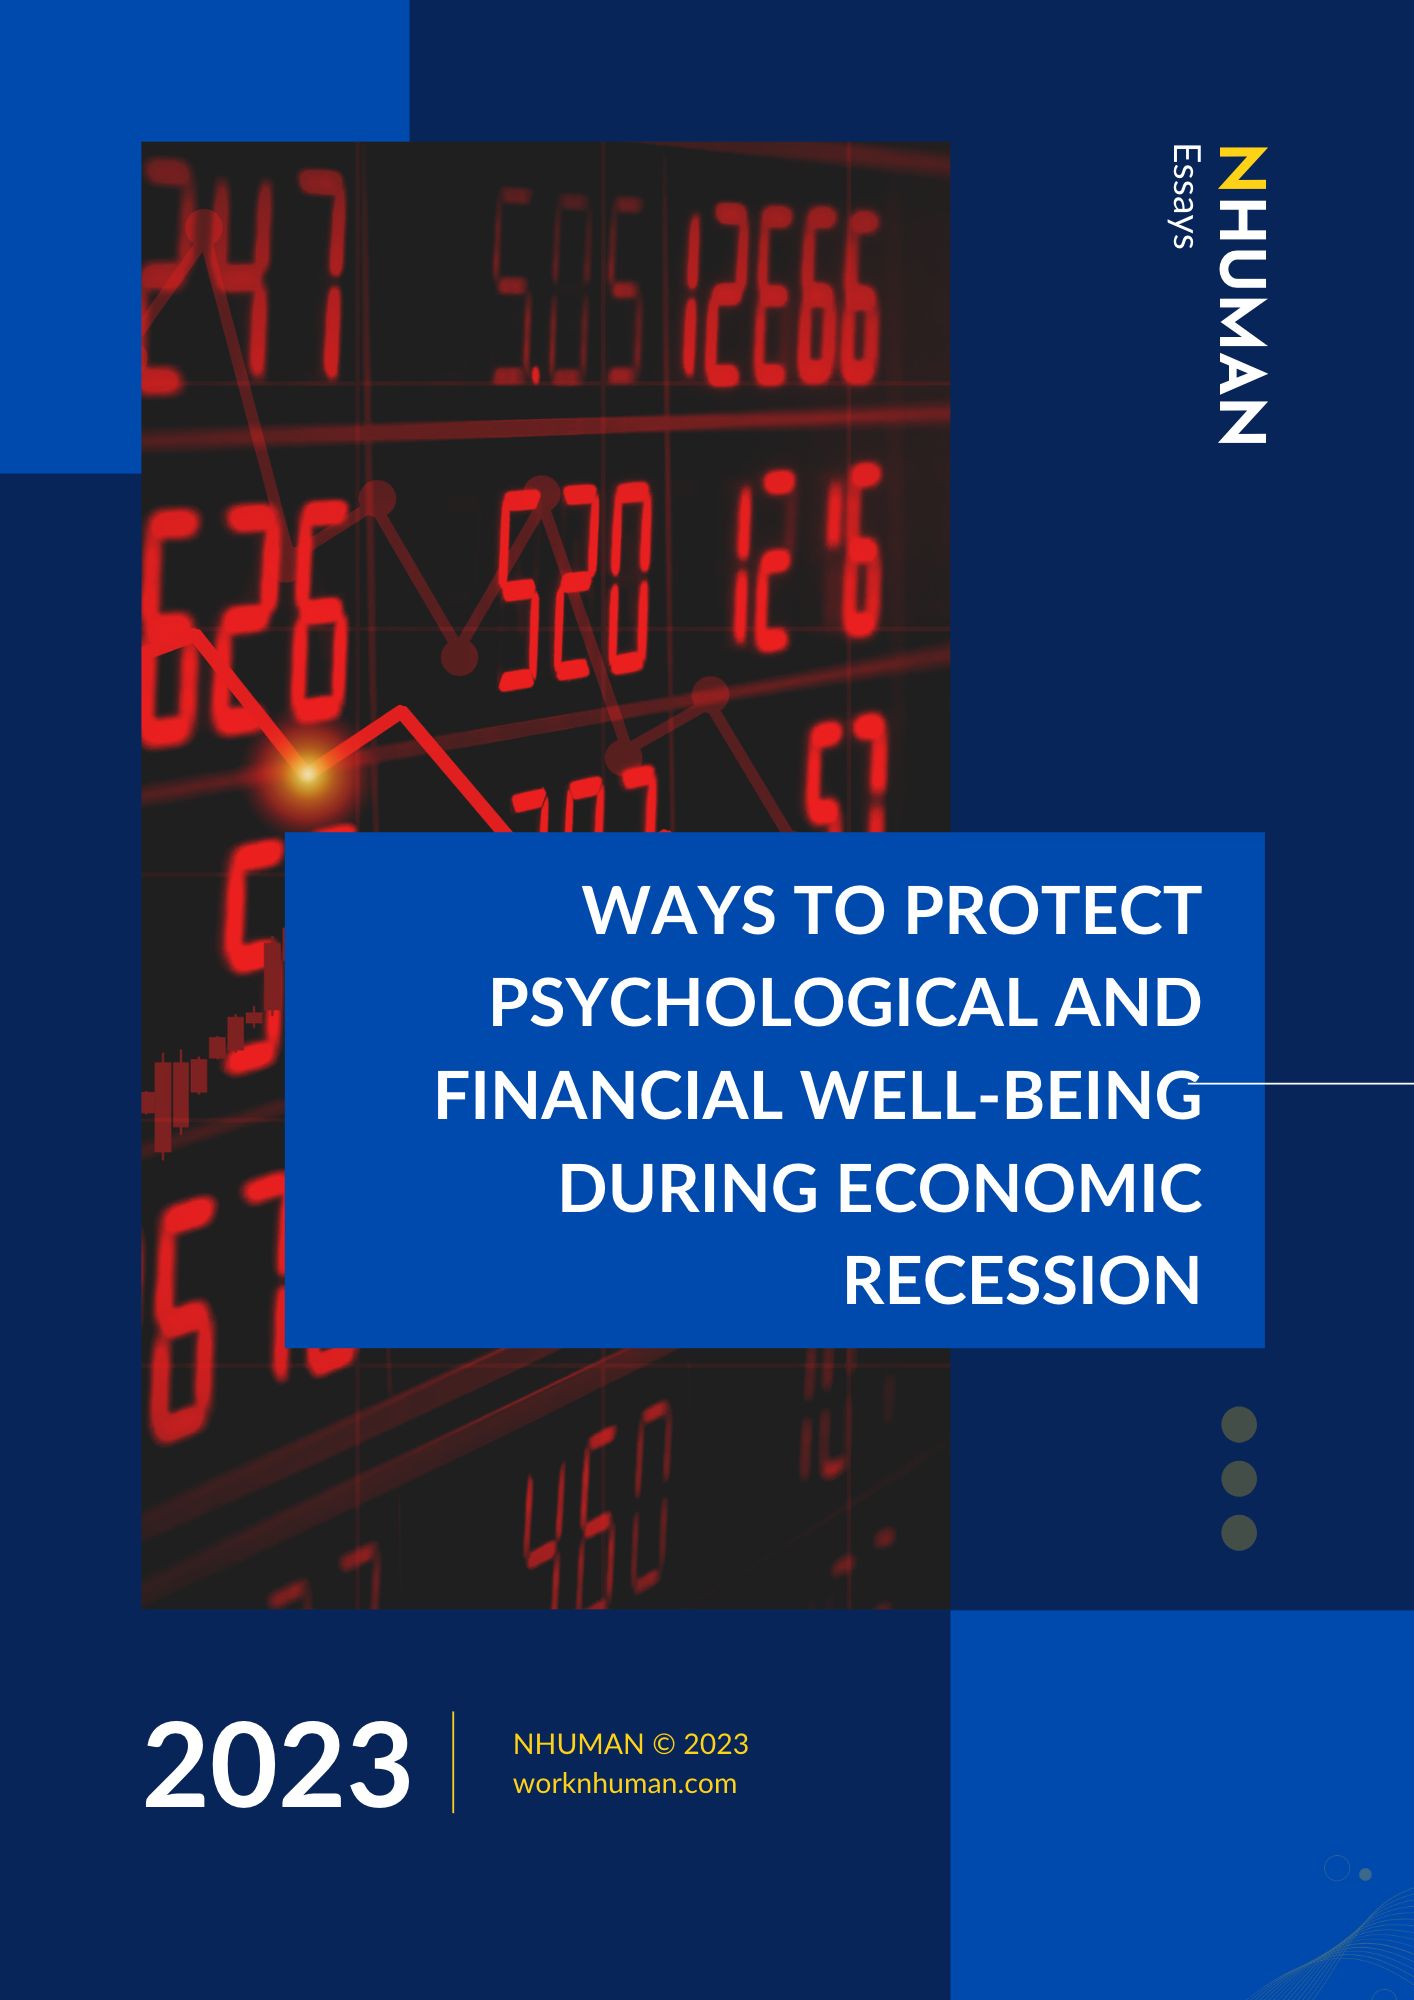 Ways to Maintain Psychological and Financial Well-Being During Economic Recessions